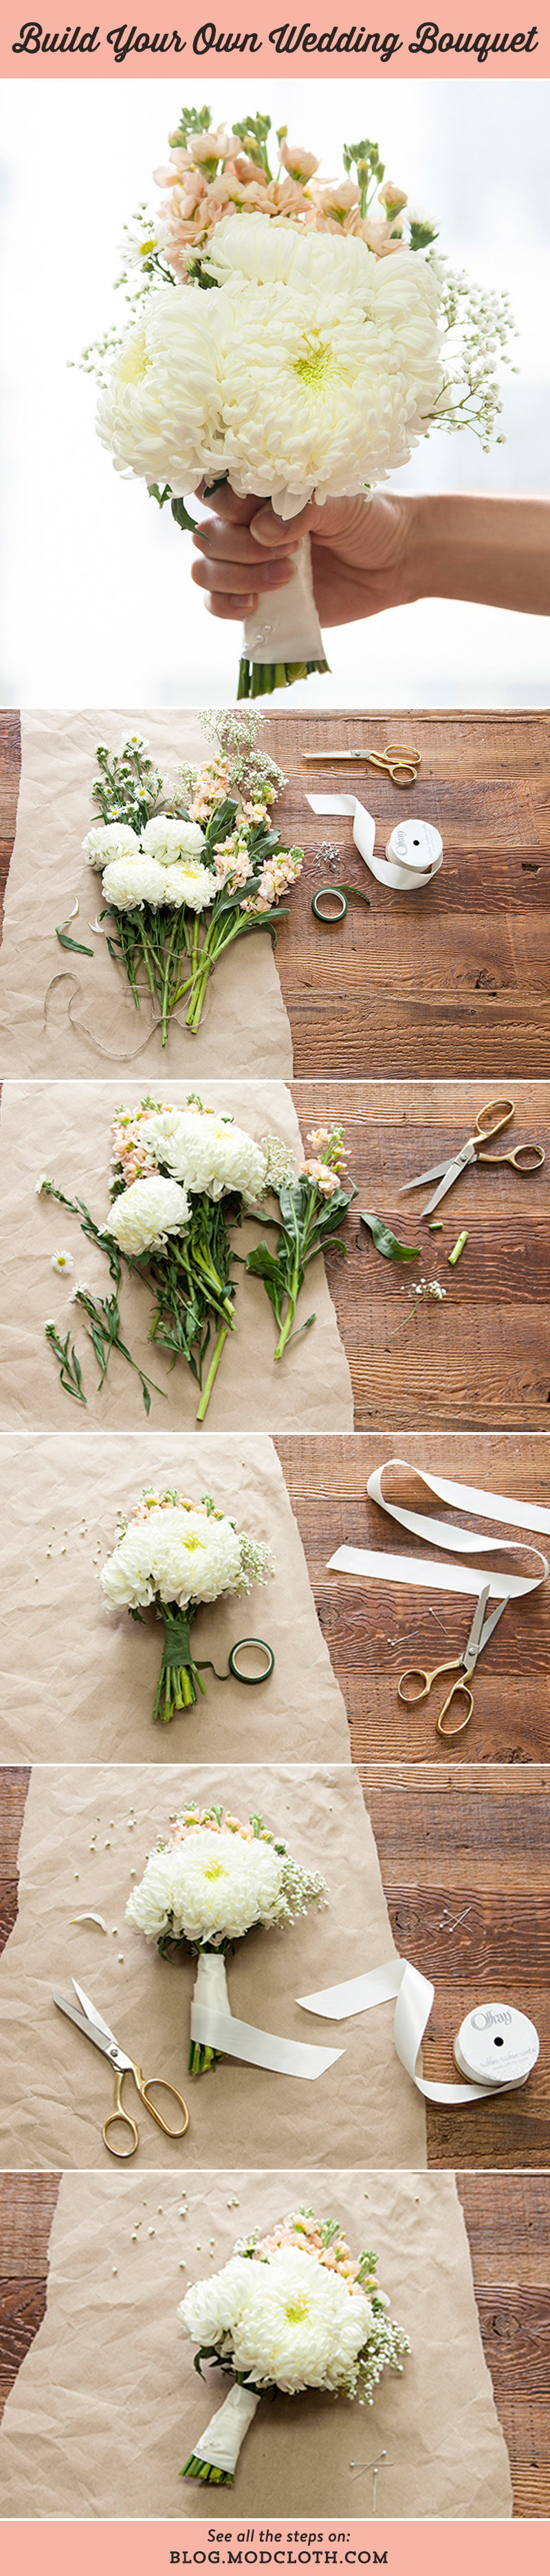 Wedding Bouquet DIY
 Build Your Own Wedding Bouquet With This Easy DIY